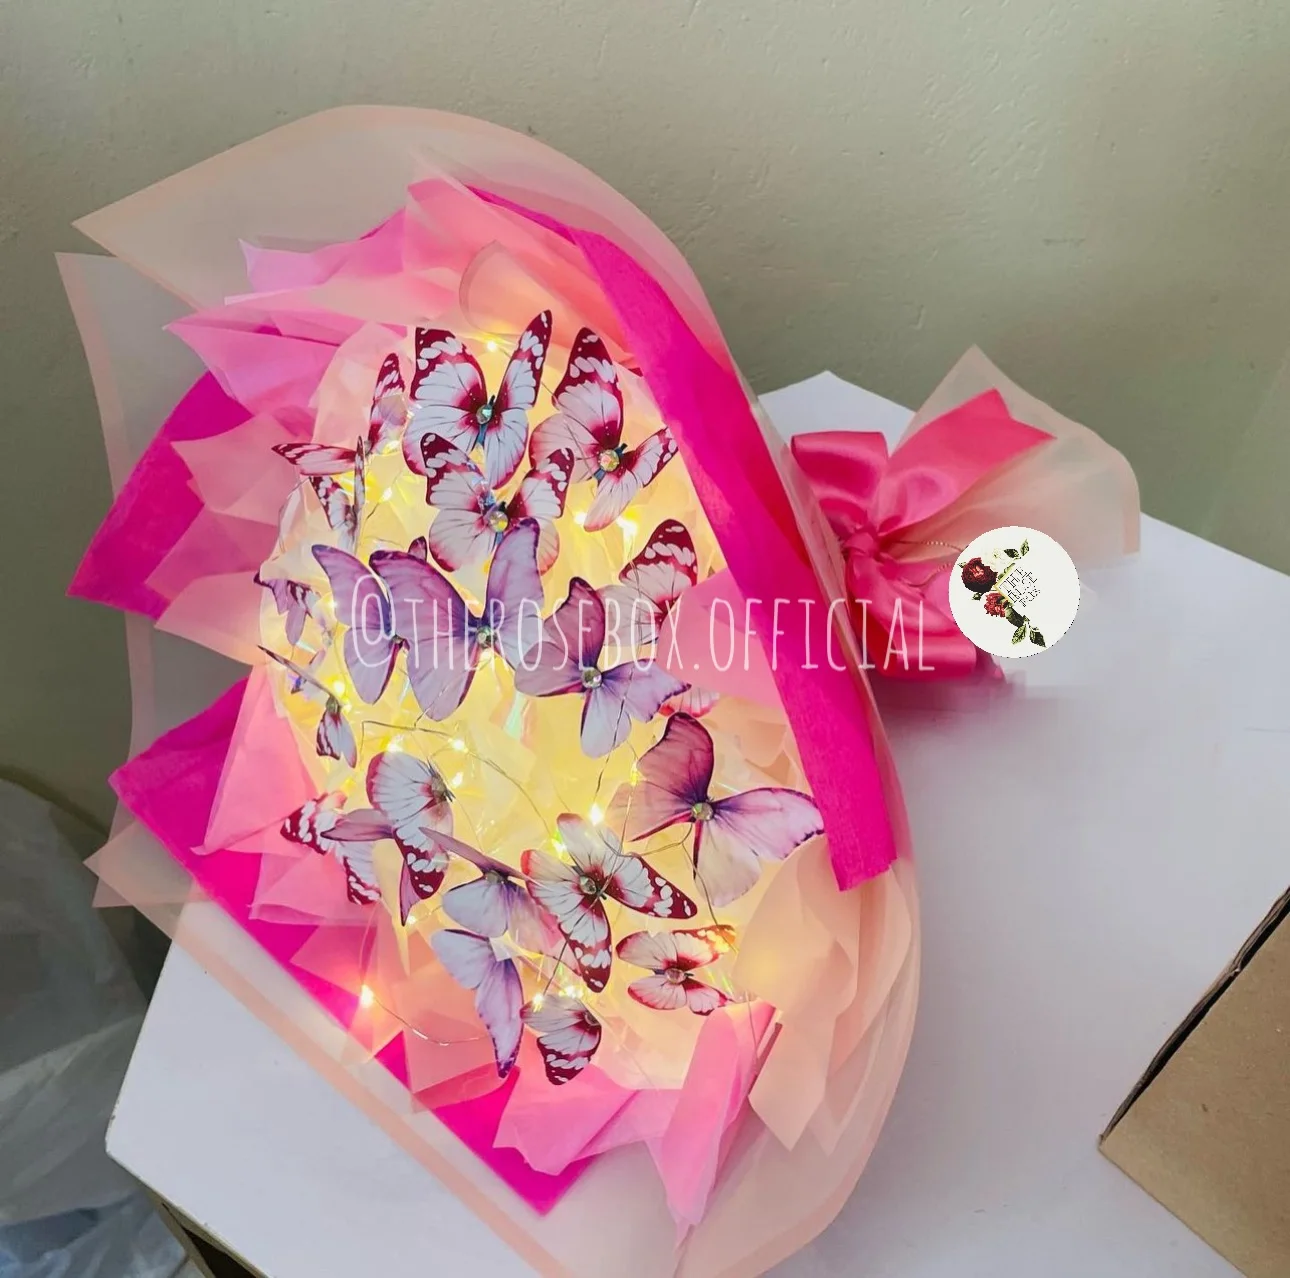 Butterfly bouquet for customised gifting